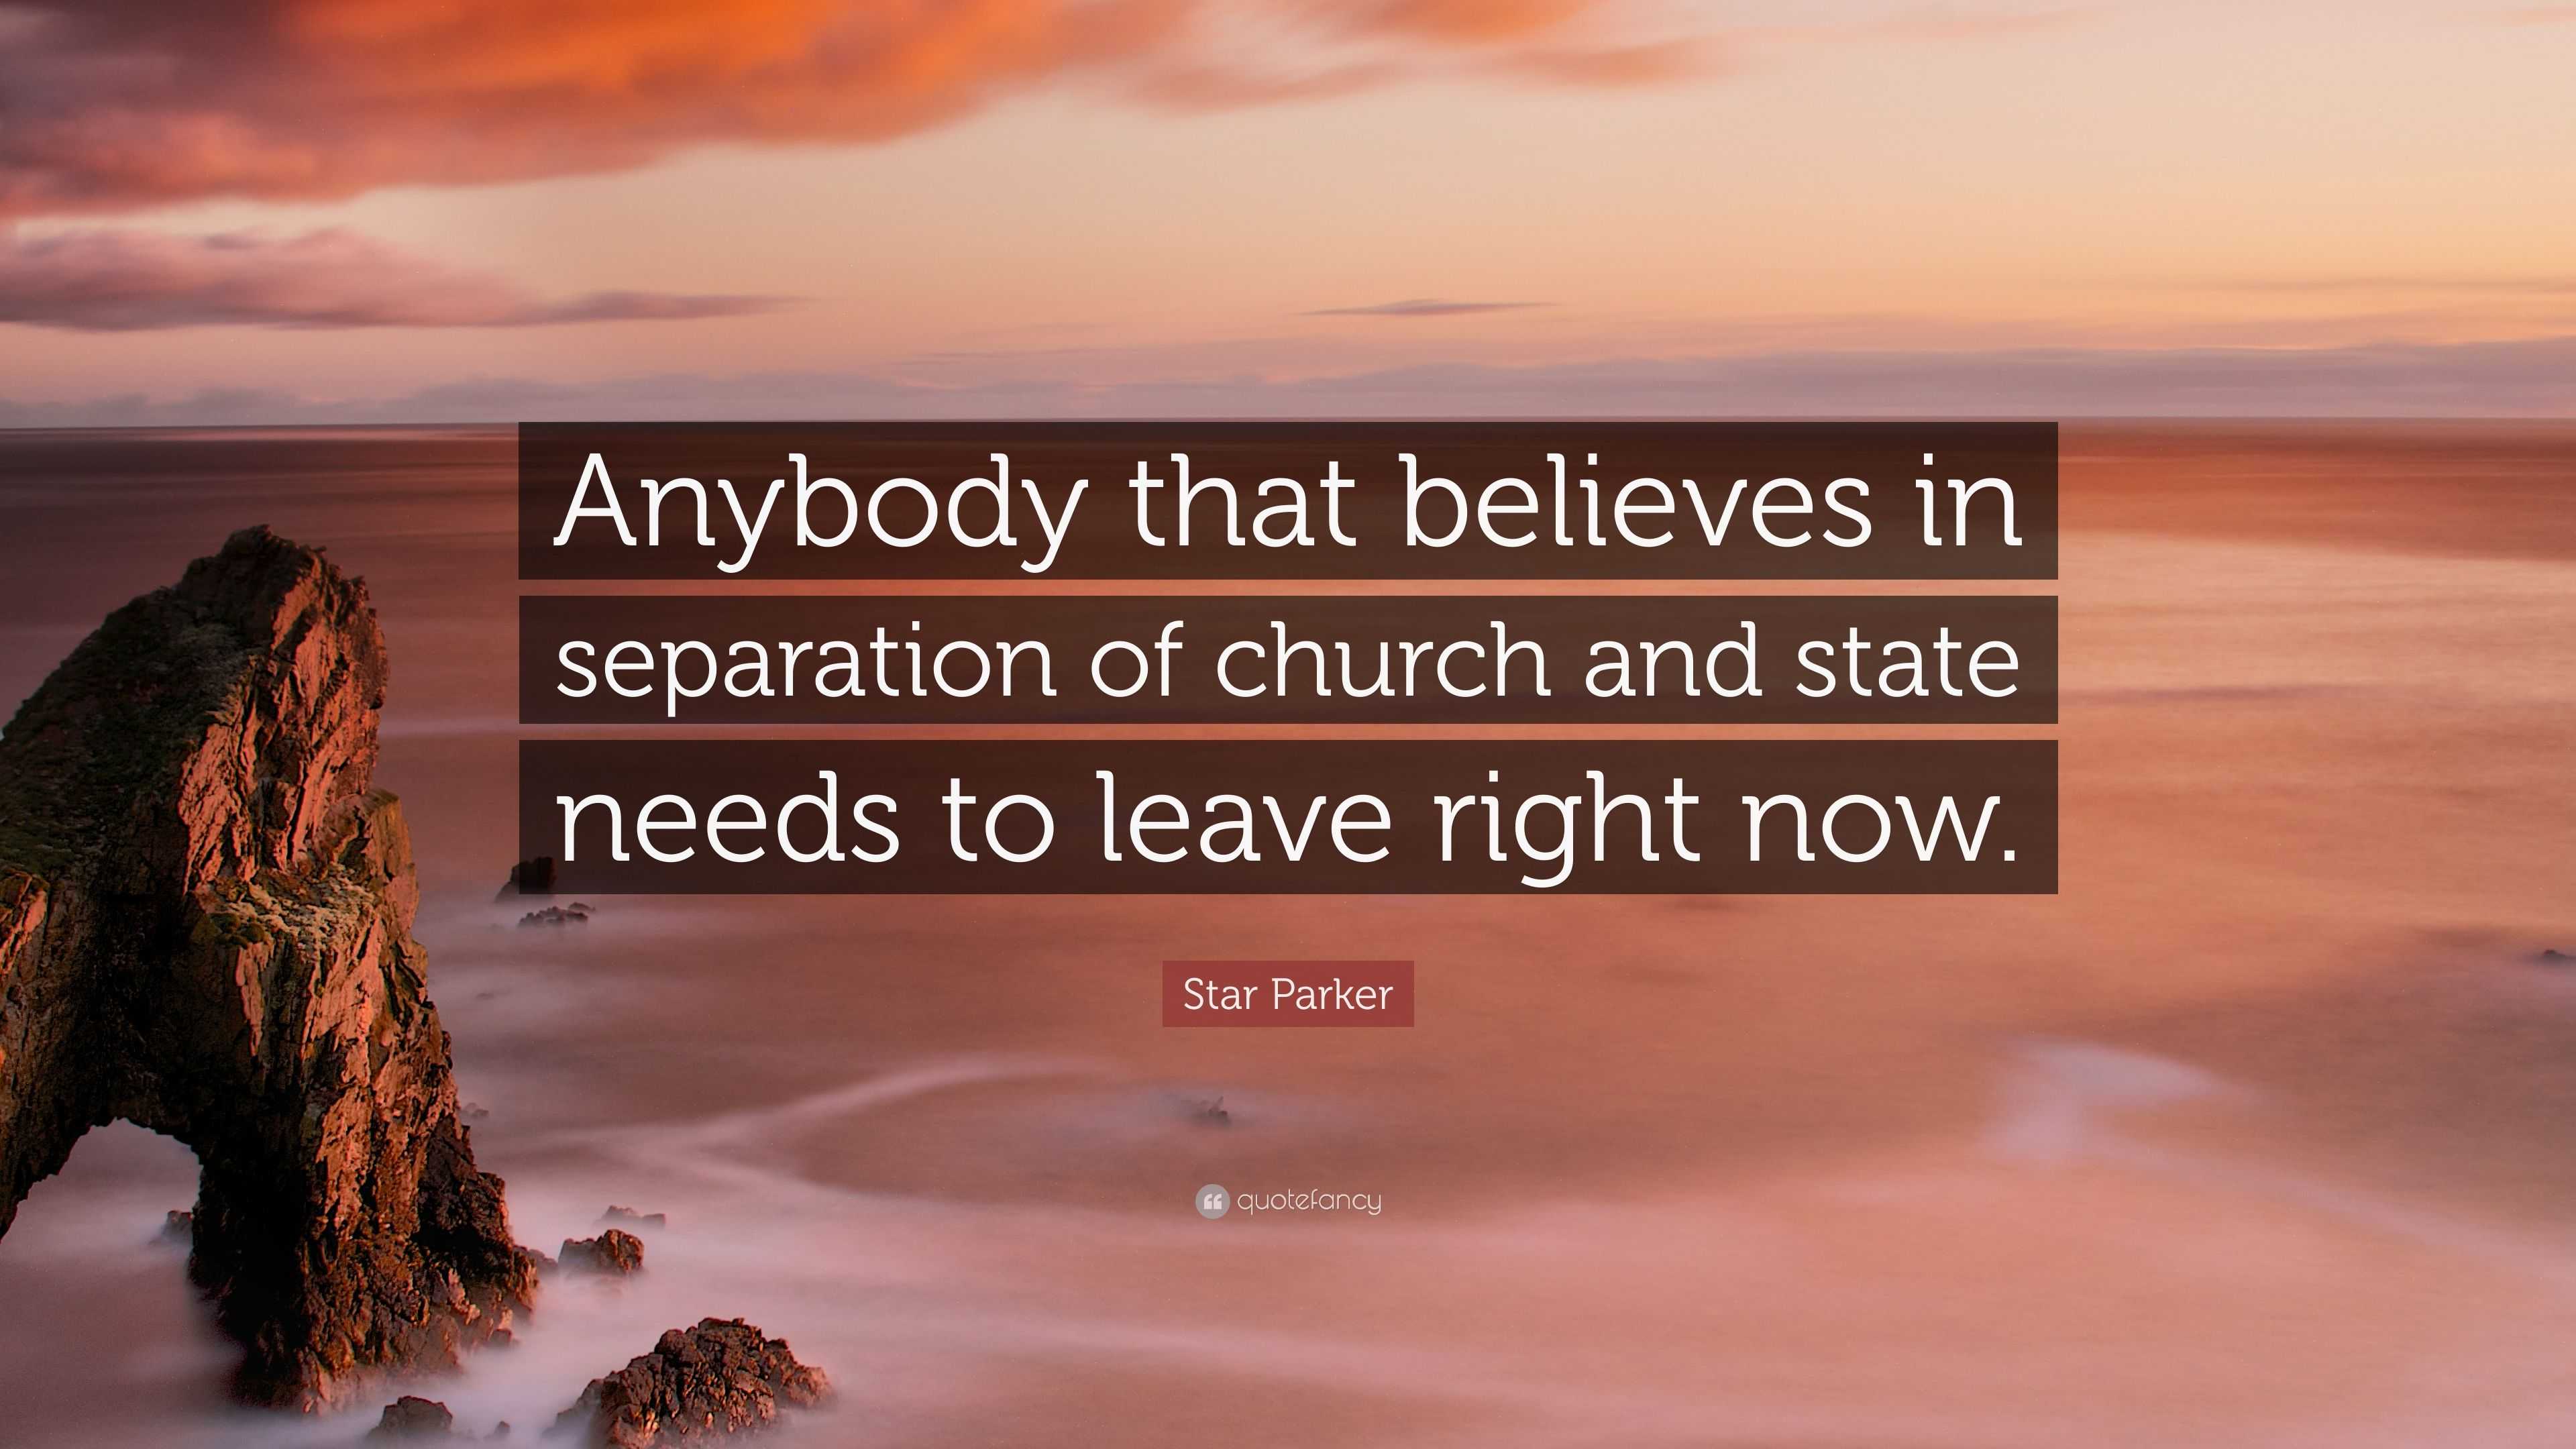 Star Parker Quote: “Anybody that believes in separation of church and ...